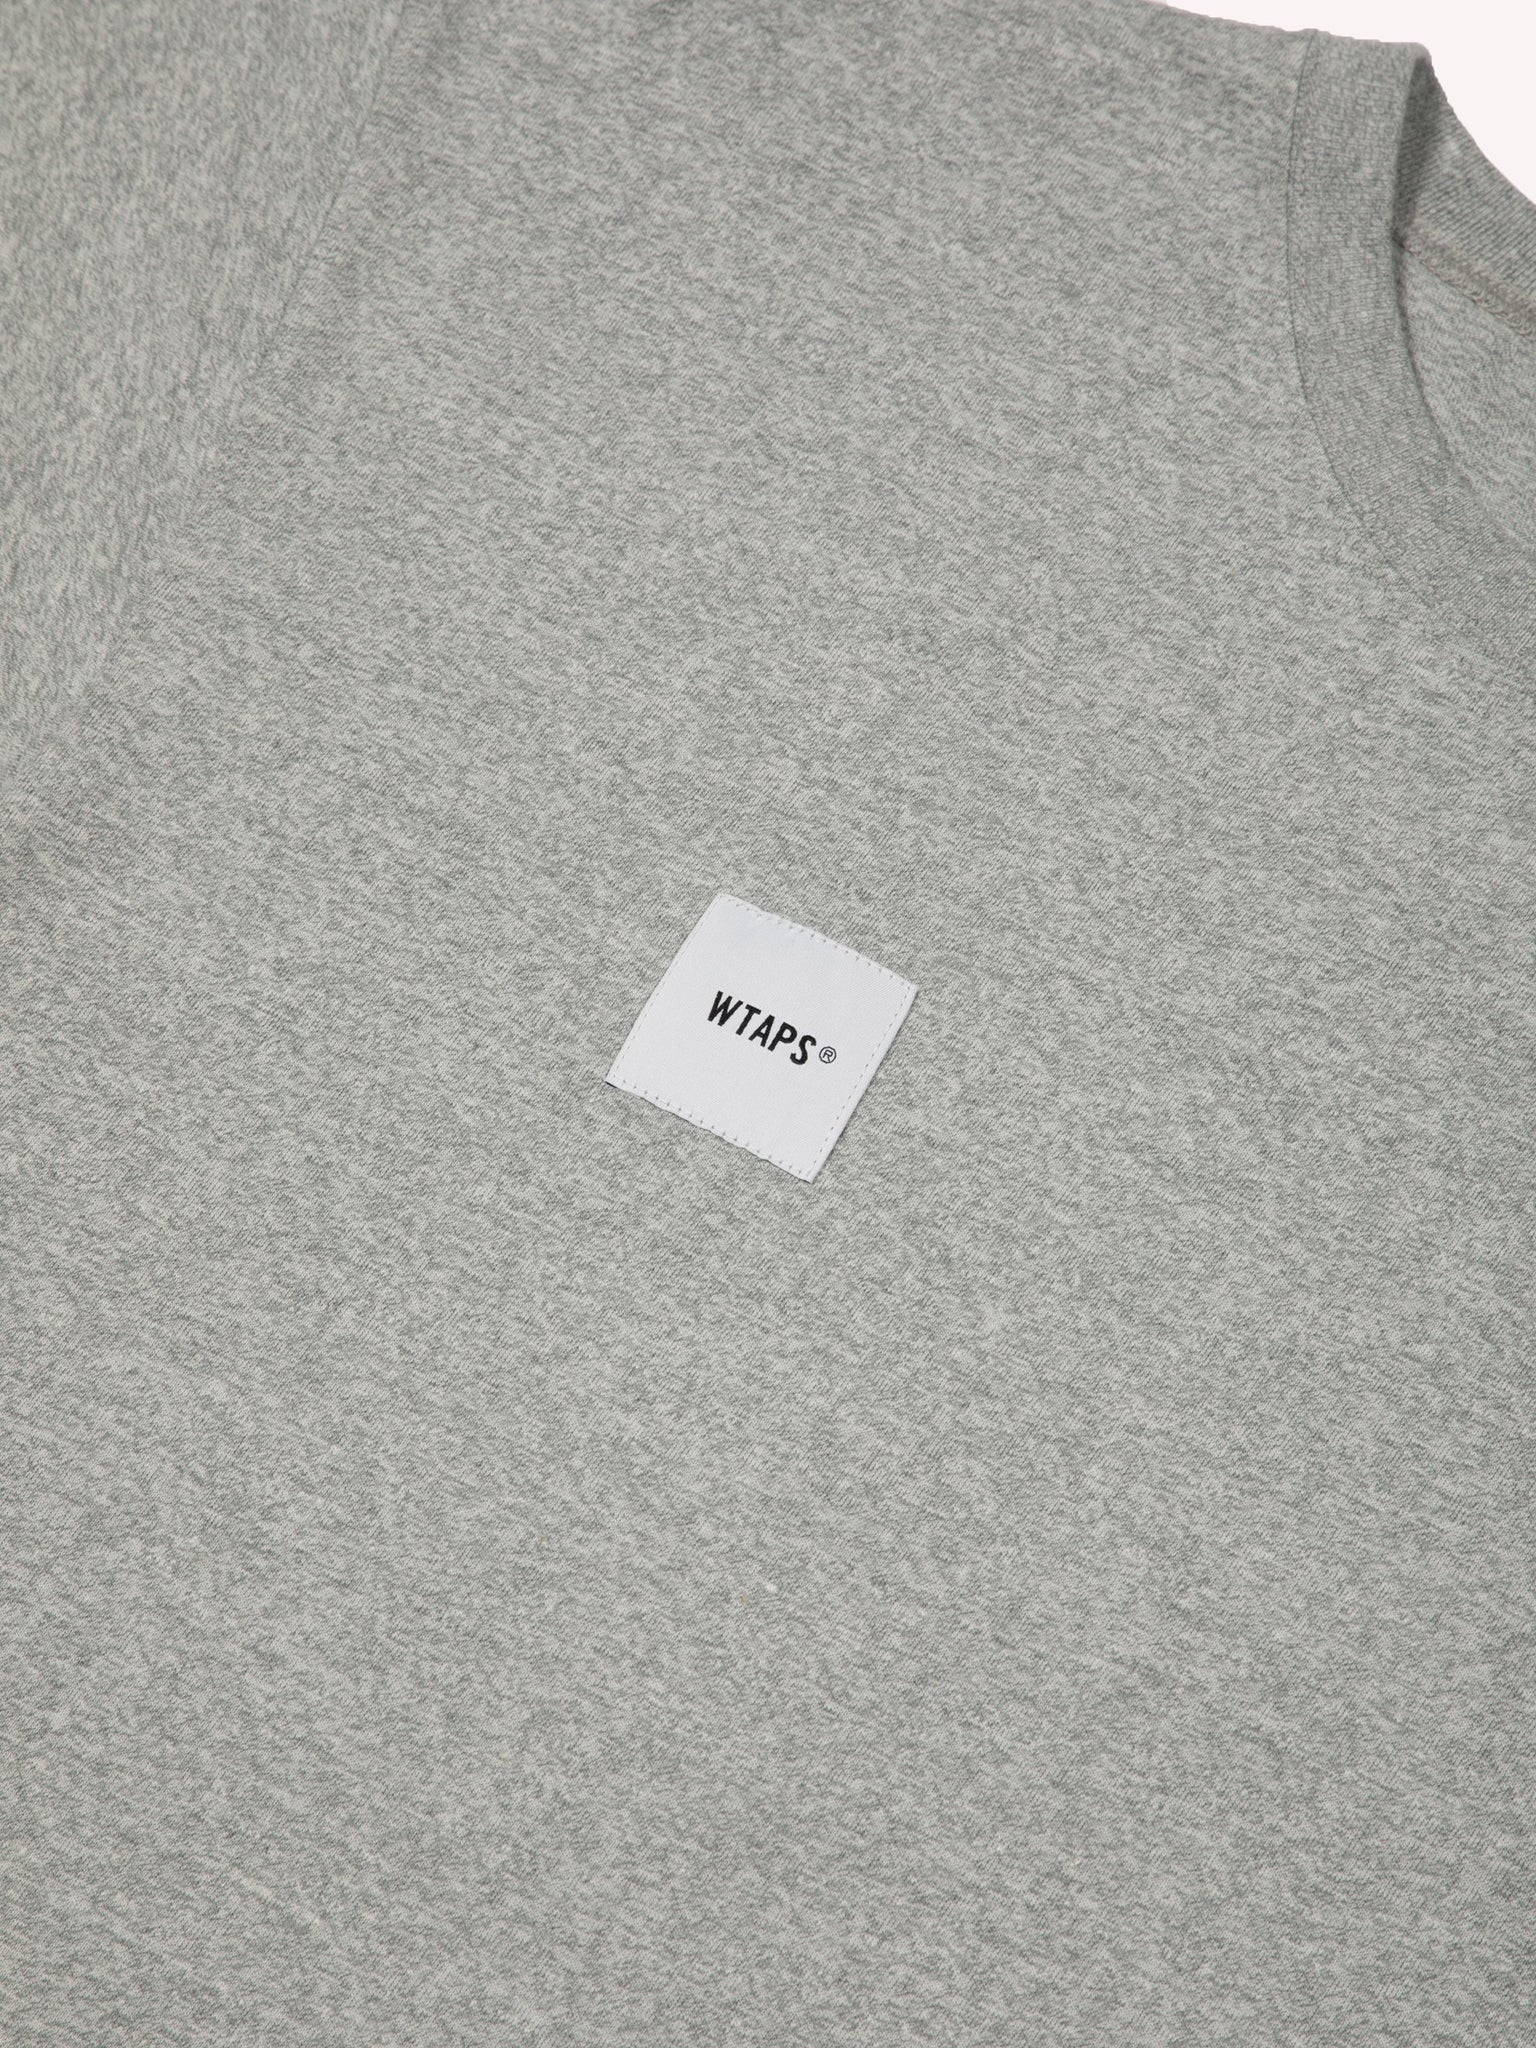 Buy Wtaps Online at UNION LOS ANGELES